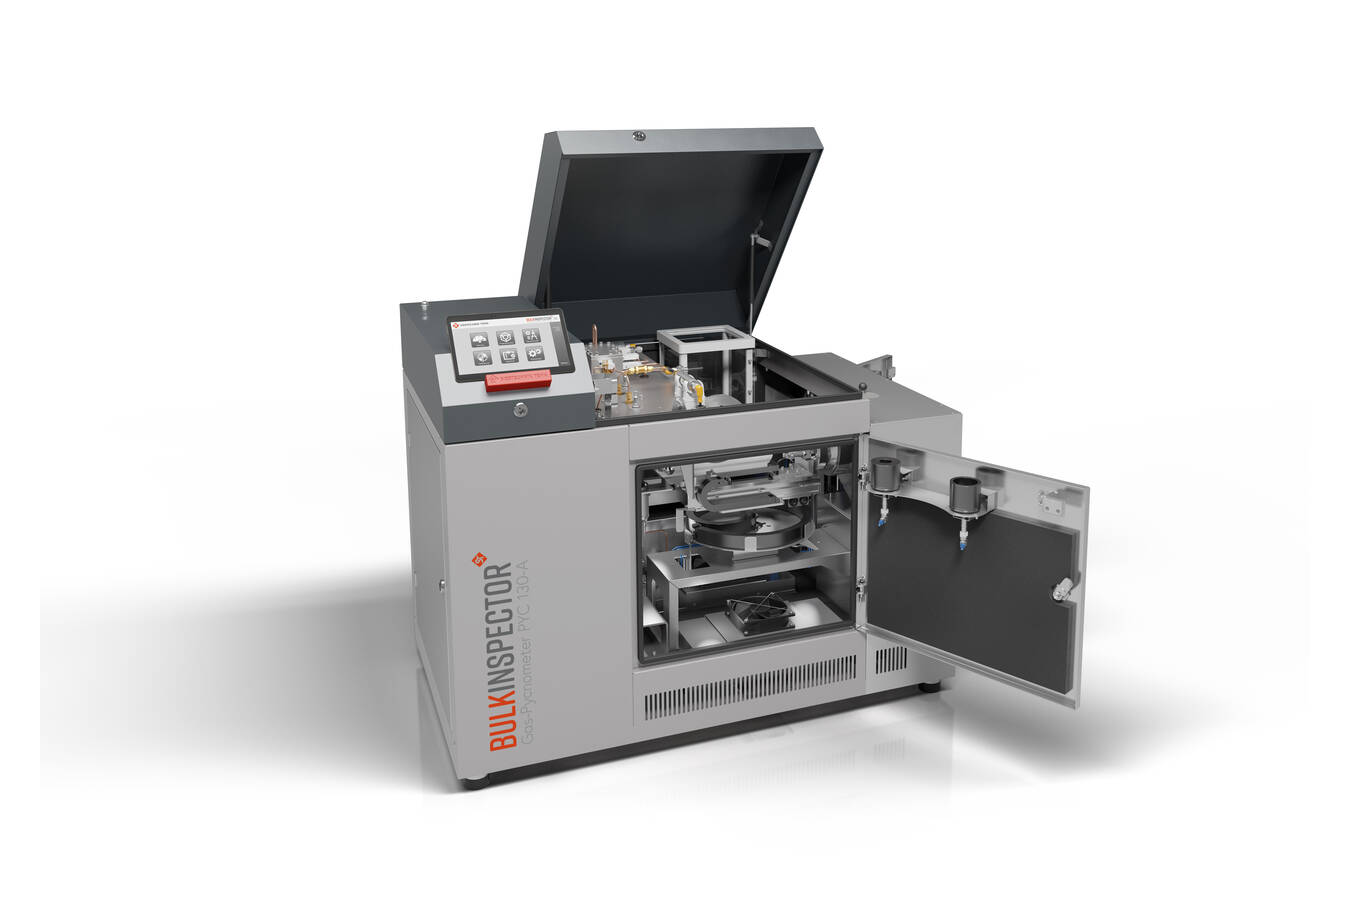 Bulkinspector by Siebtechnik TEMA ensures process safety Fully automatic gas pycnometer measures volume and mass of a bulk solids sample with highest precision for trouble-free production.